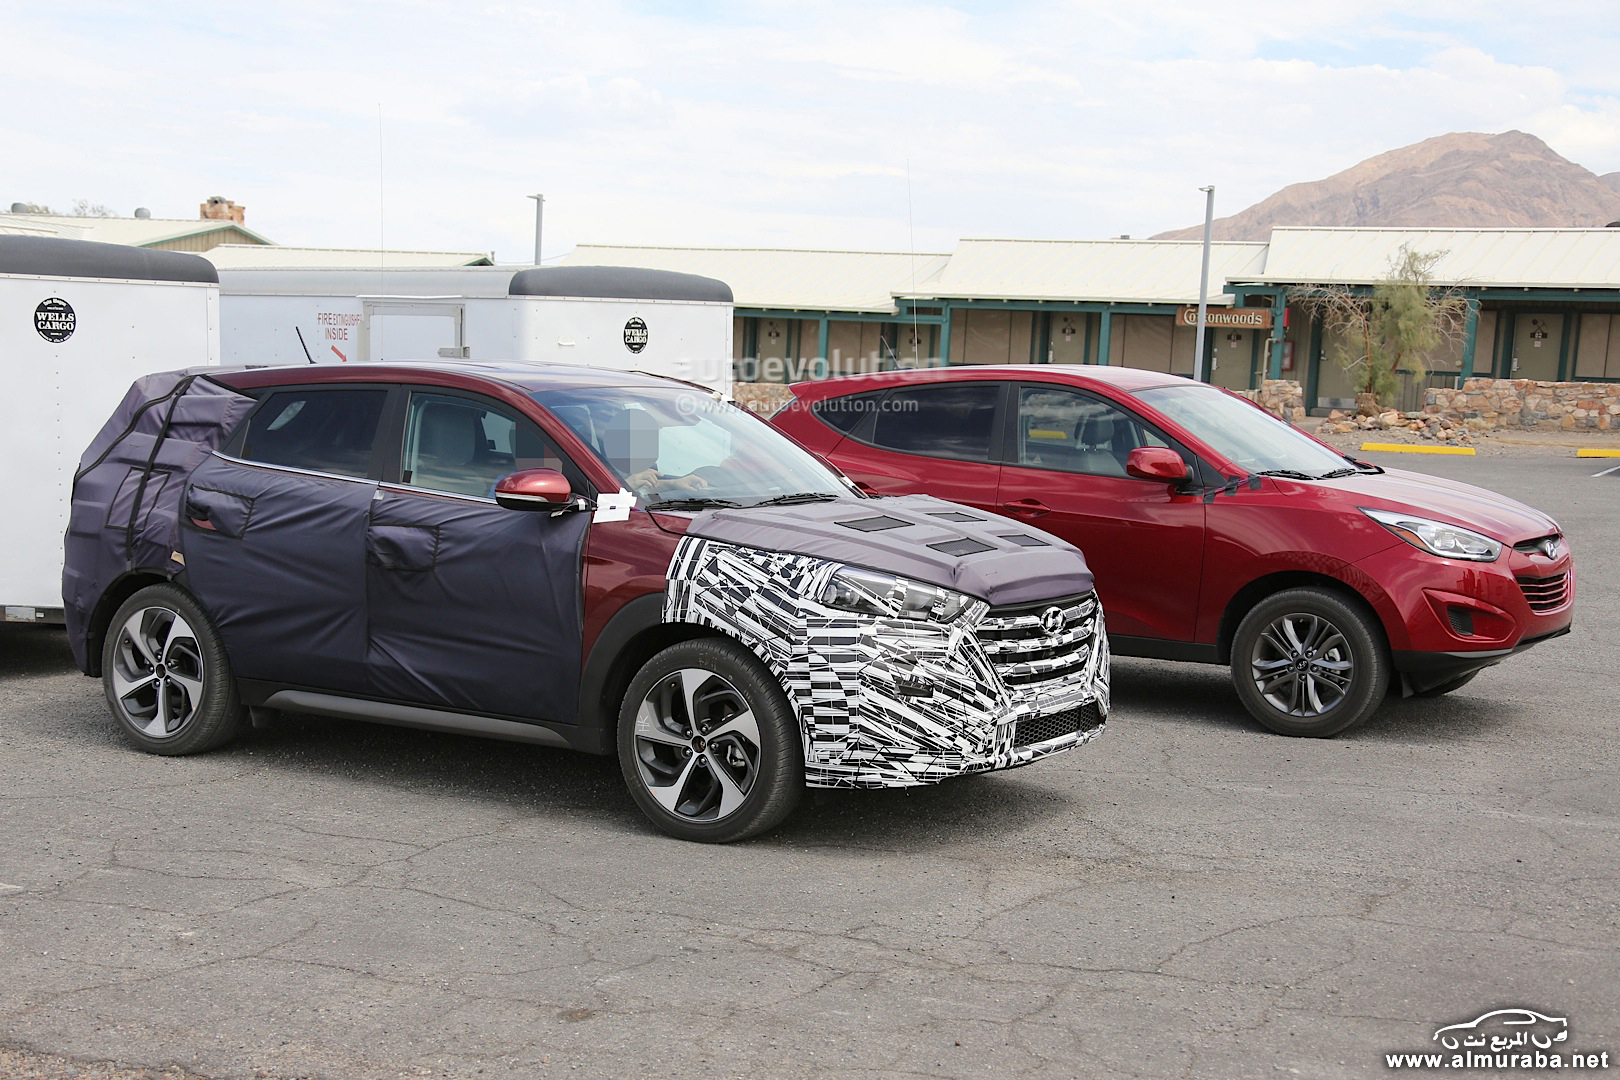 all-new-2016-hyundai-tucson-spied-with-less-camouflage-in-america-photo-gallery_11